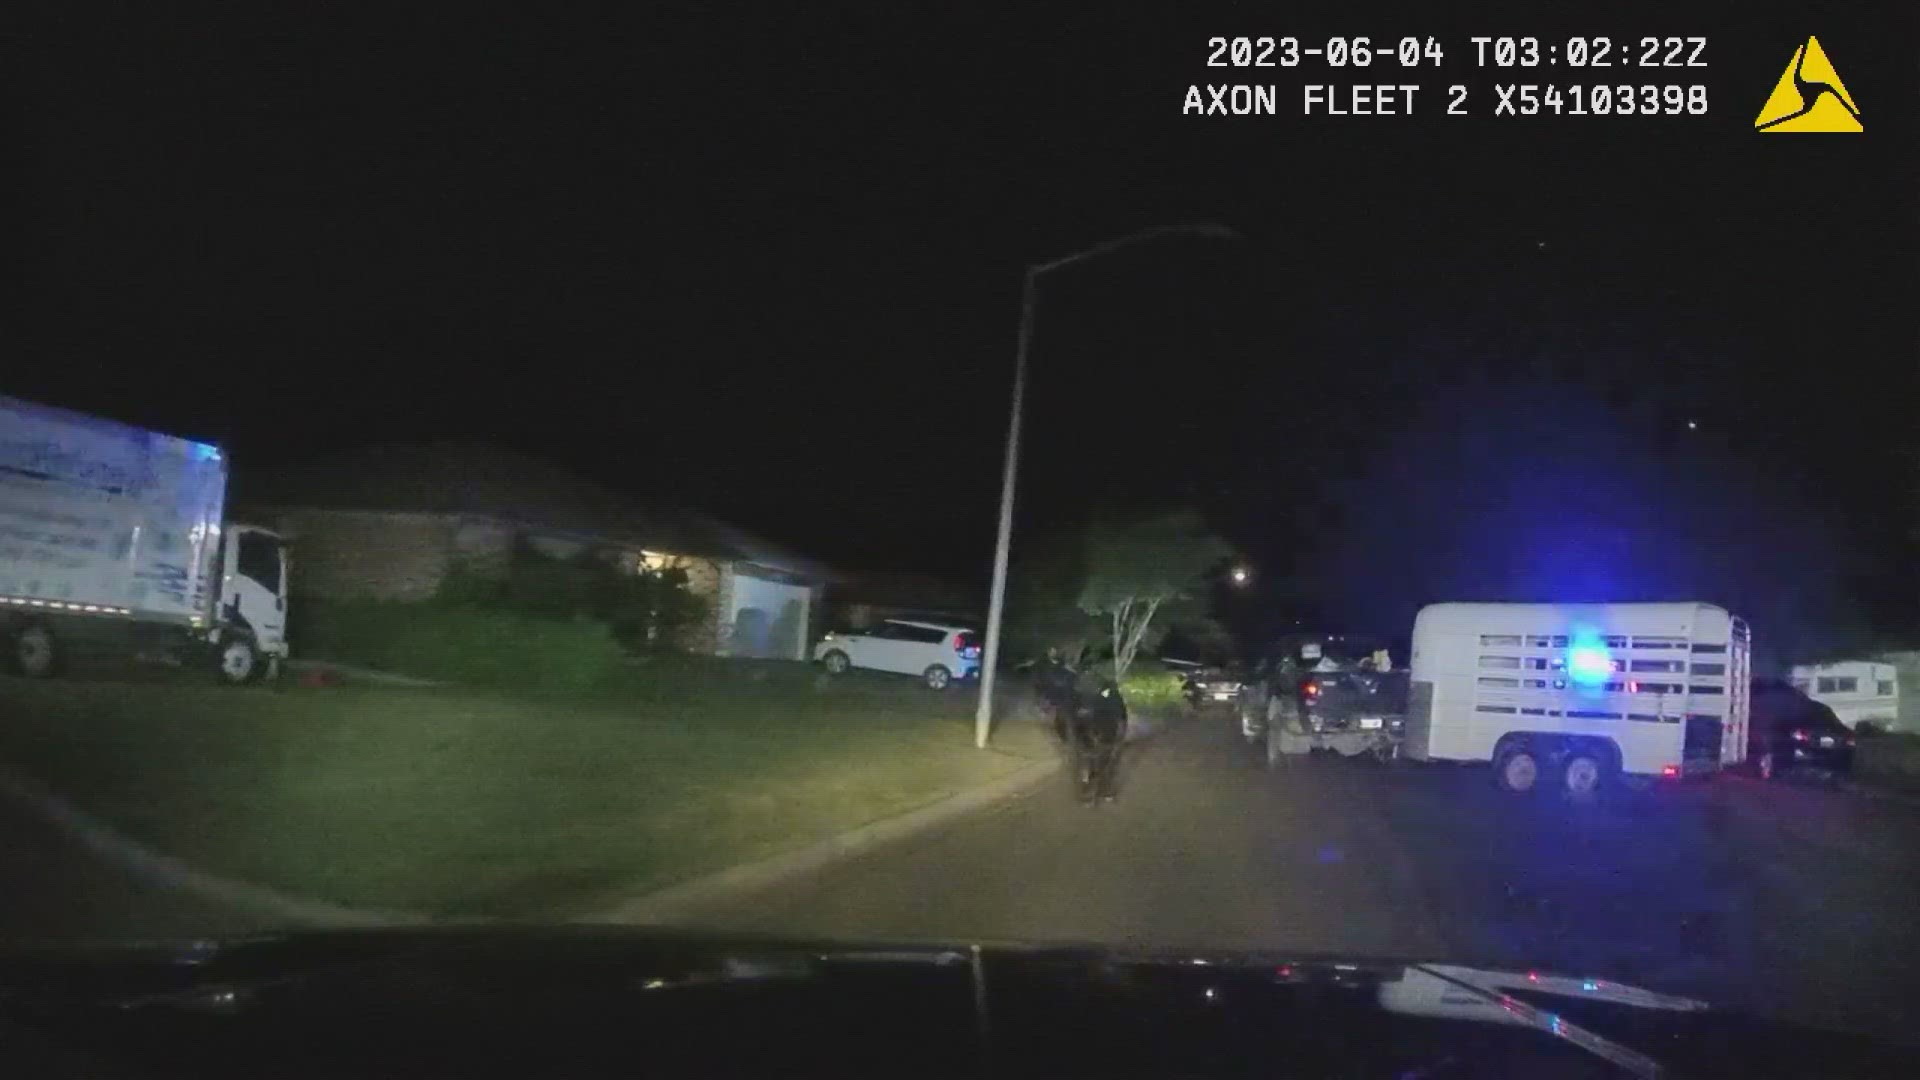 Police in Denton, Texas say the bull was "quite agitated" and was refusing to get back onto a cattle trailer.